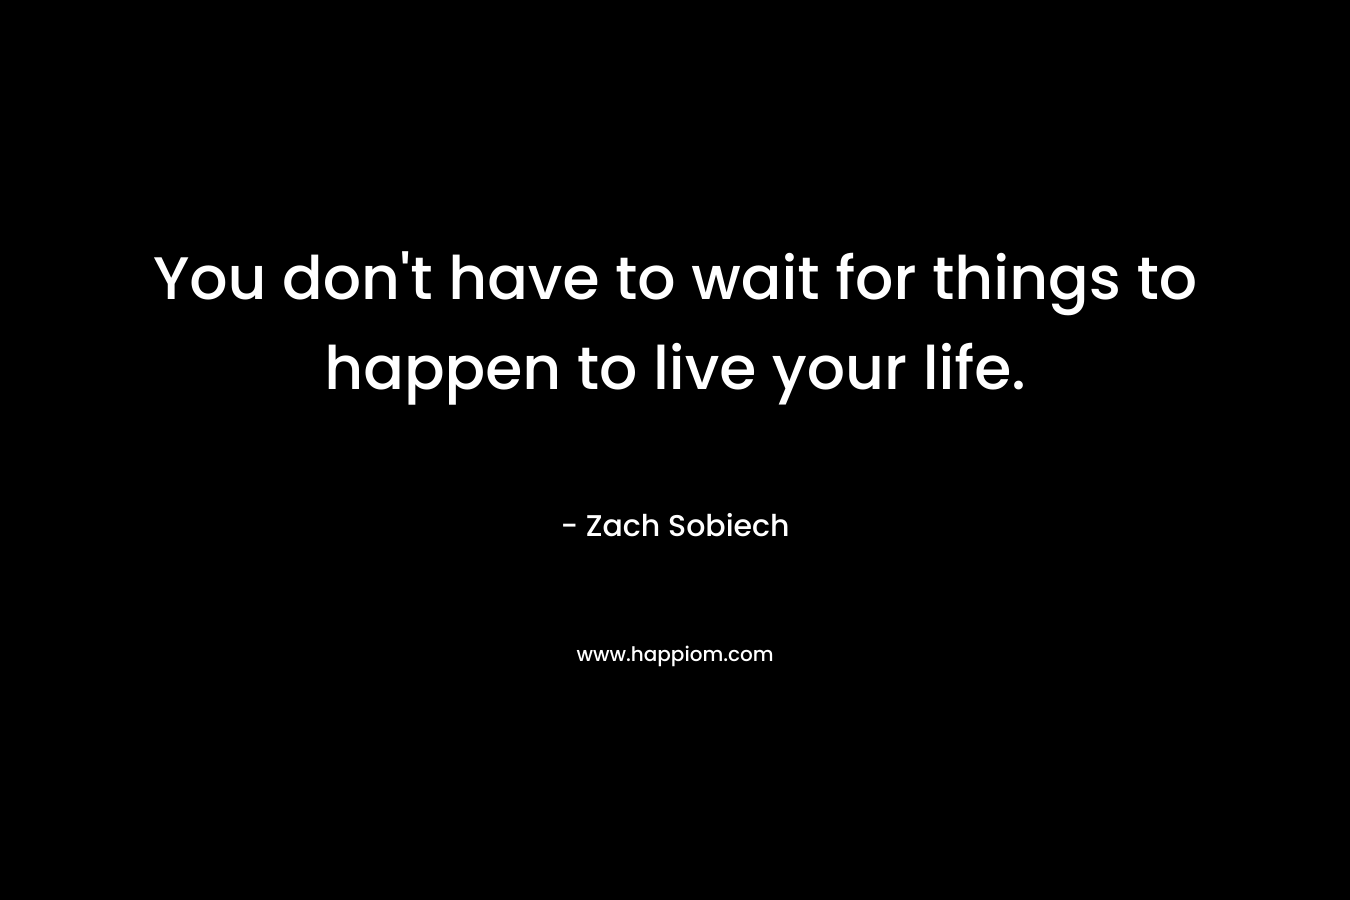 You don't have to wait for things to happen to live your life.